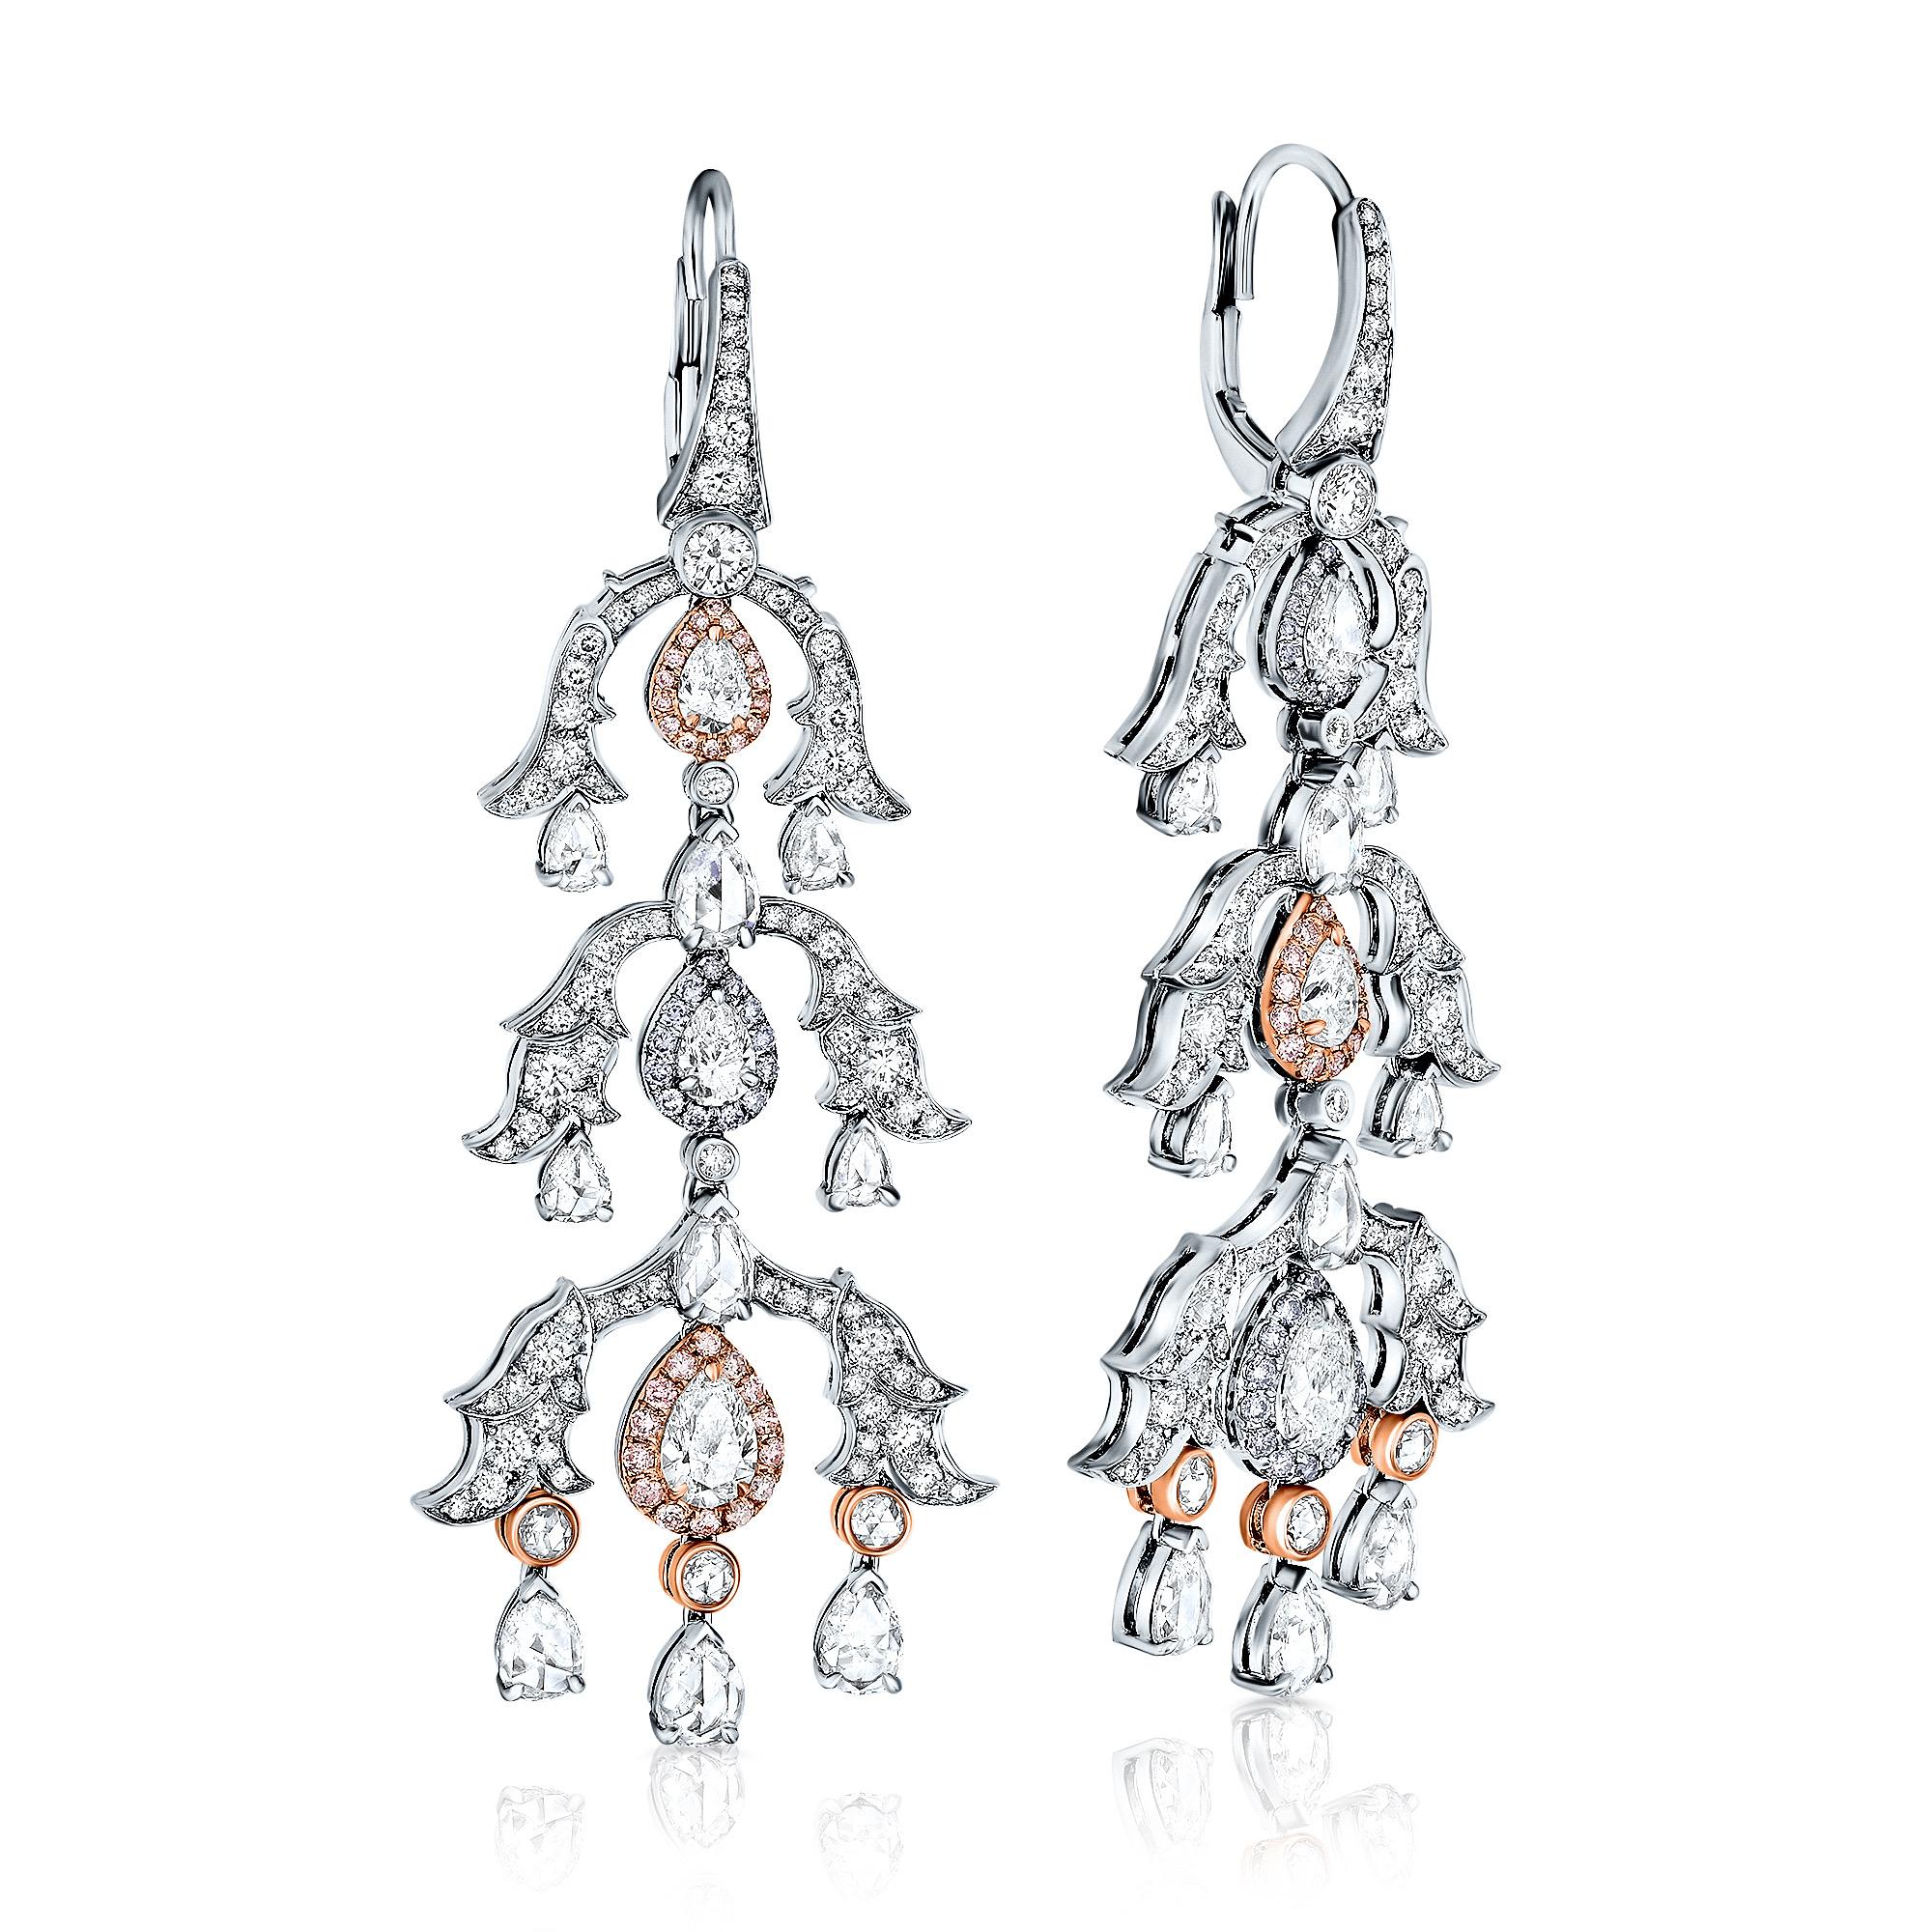 Introducing our stunning matched pair of White and Pink Diamond chandelier Drop Earrings, just under 7 carats and set in 18K white and rose gold.

These earrings are truly perfect for any occasion. They showcase 24 pear-shaped white diamonds,